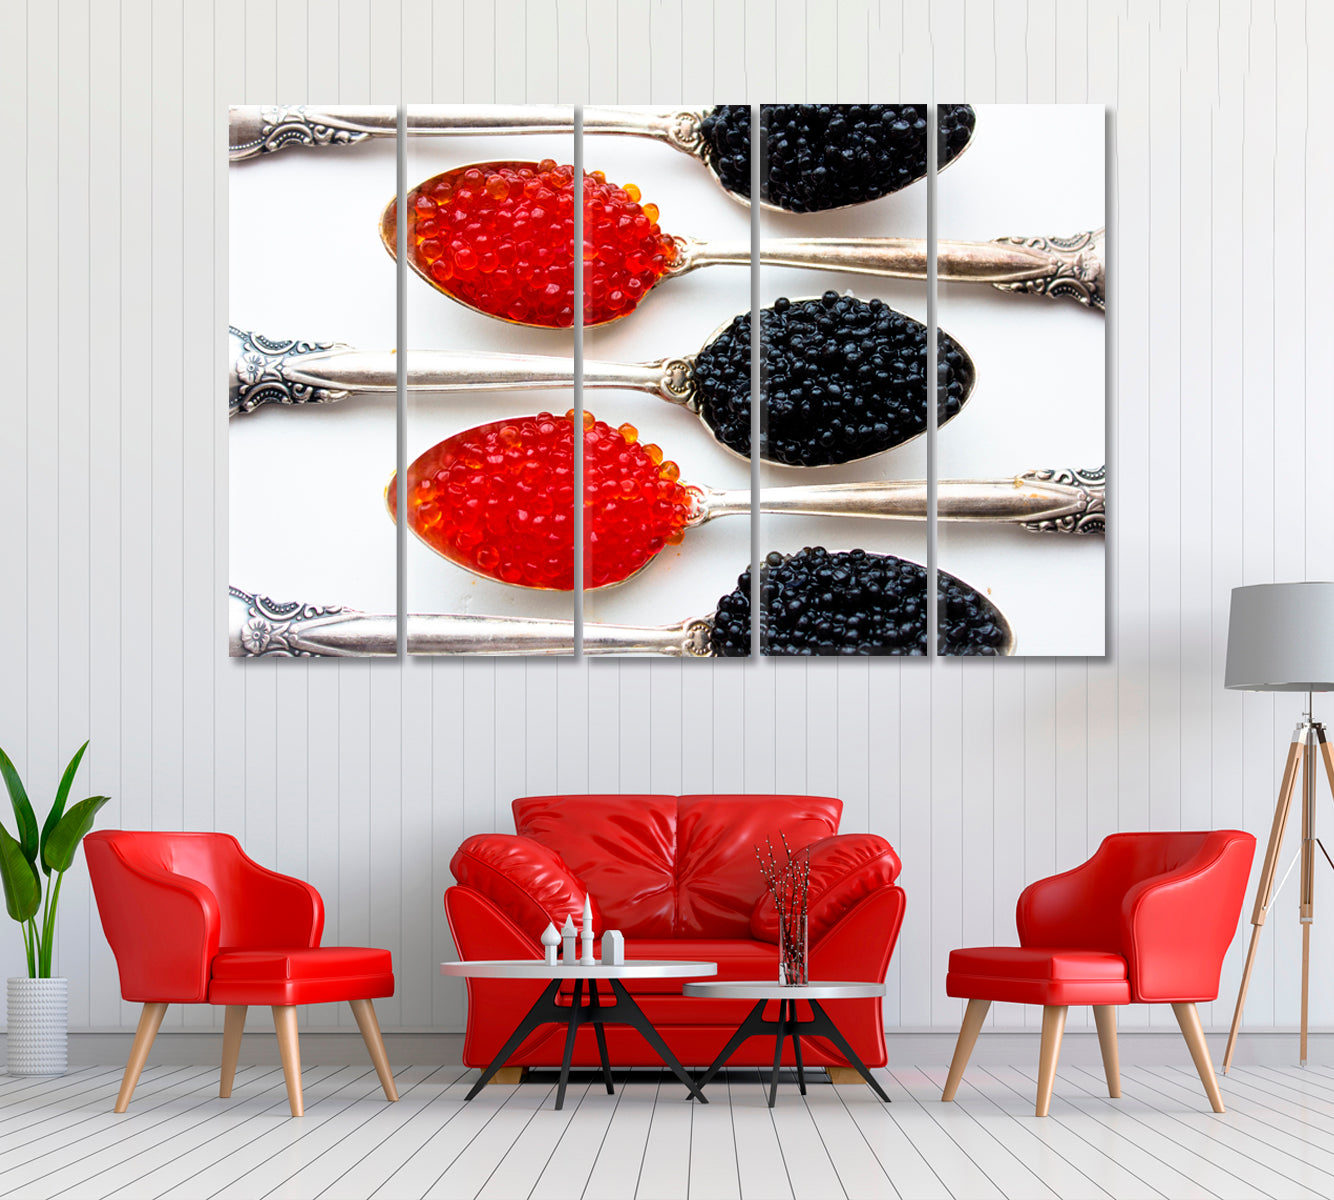 Red and Black Caviar Canvas Print ArtLexy 5 Panels 36"x24" inches 